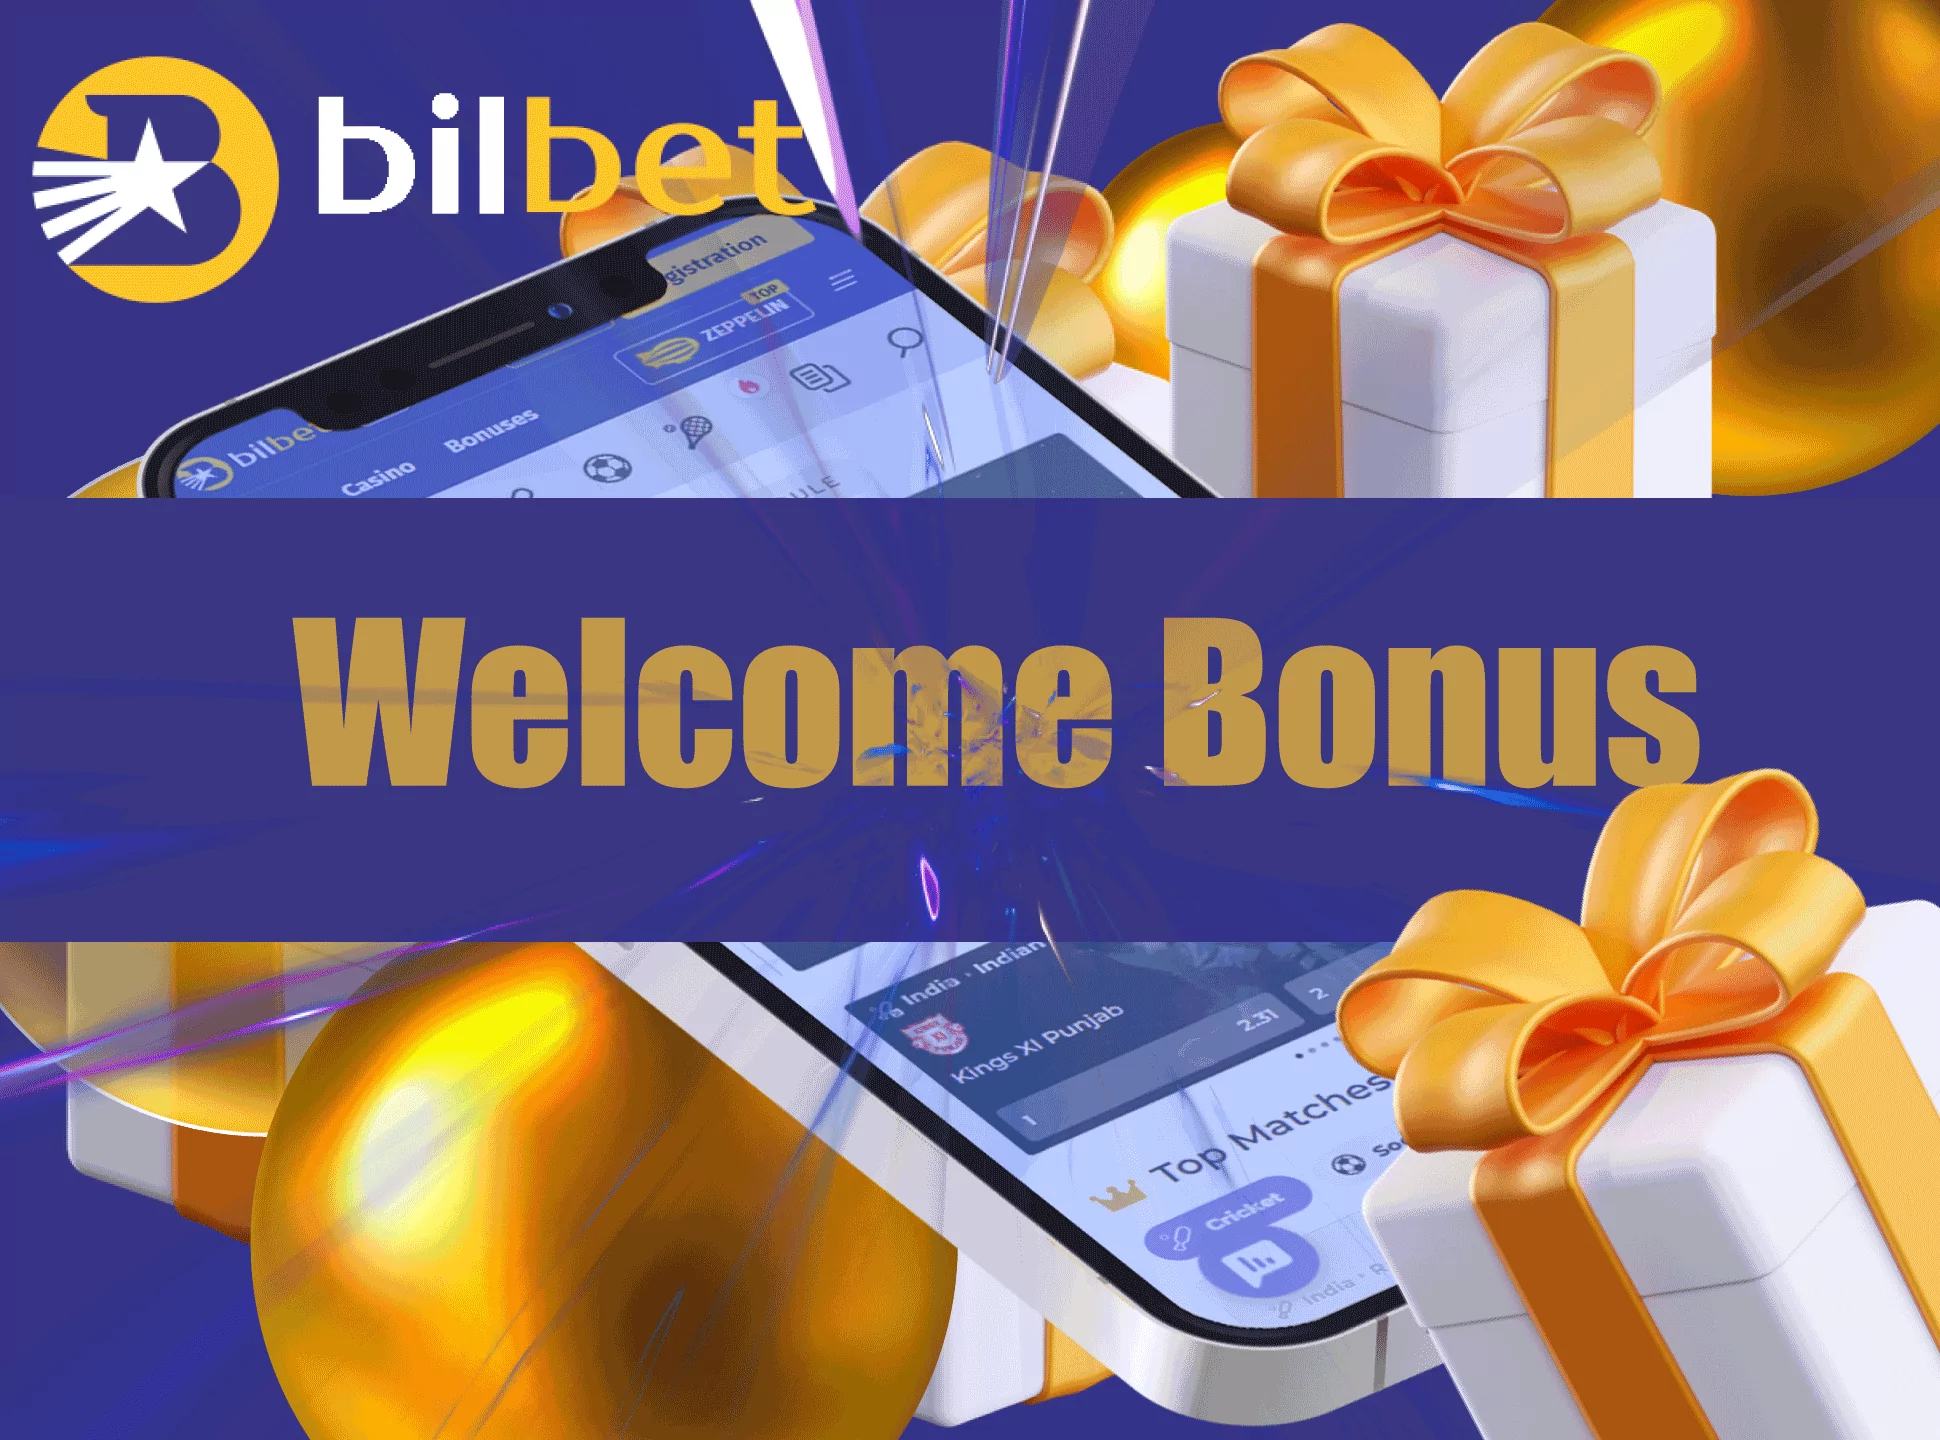 Right after the registration you can get a Bilbet welcome bonus.